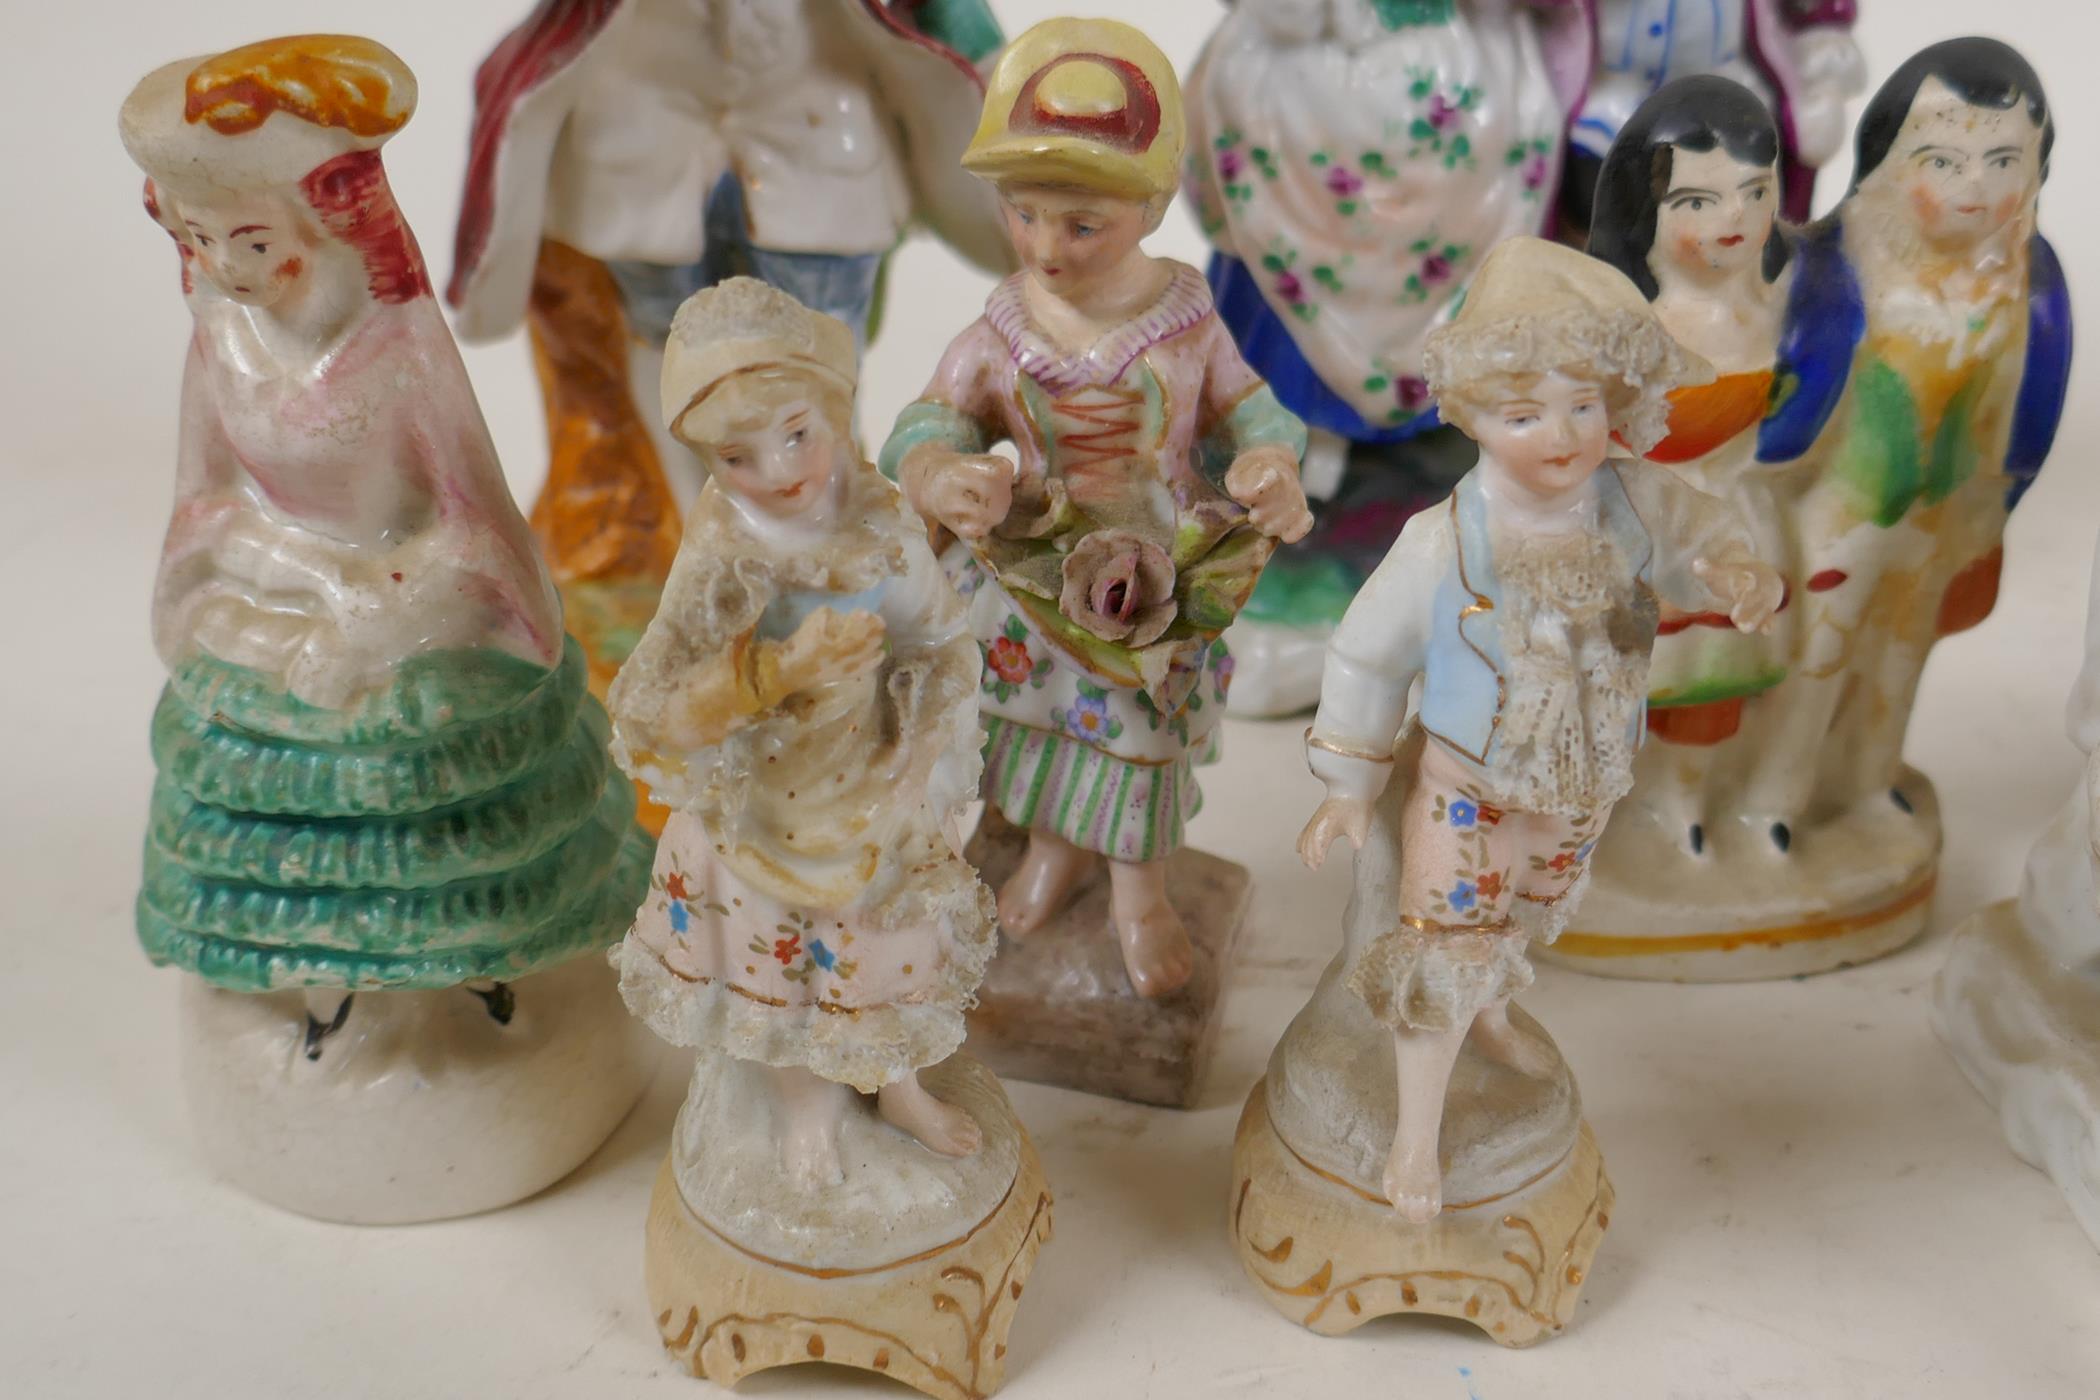 Eleven C19th continental porcelain figurines including groups and a fairing, largest 5½" - Image 3 of 6